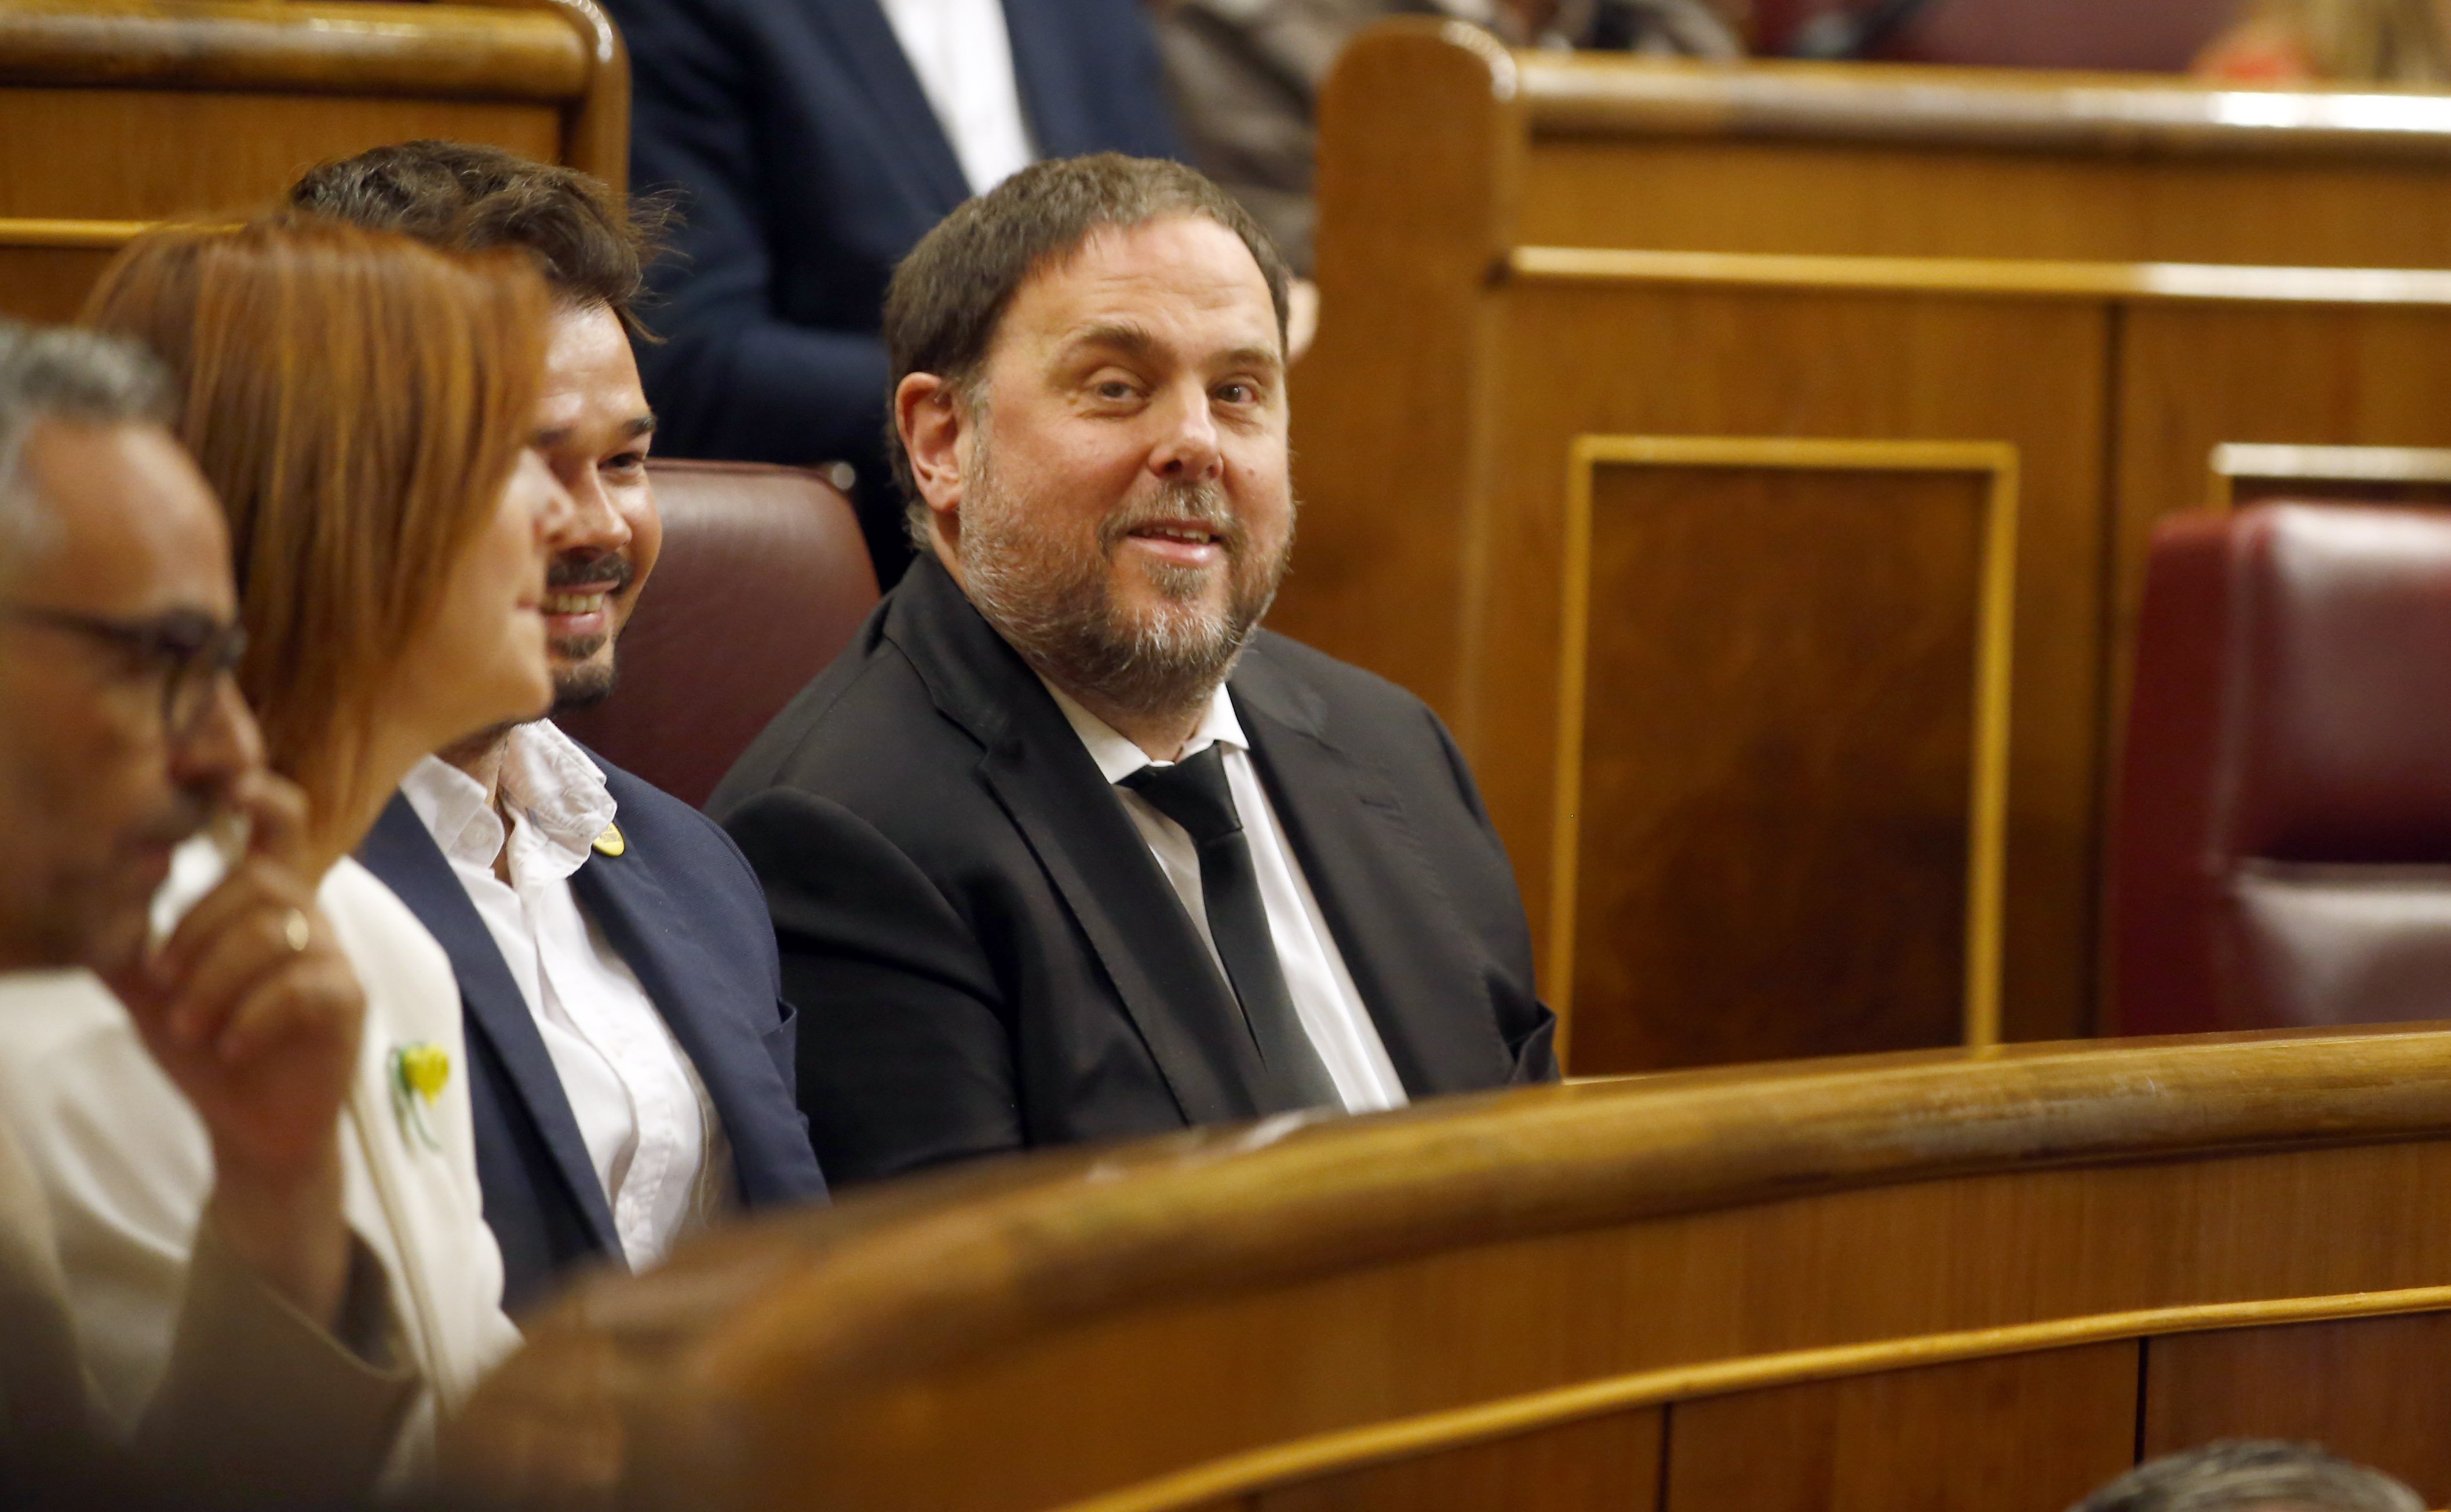 Oriol Junqueras, jailed since 2017, ratified as ERC party leader with 88% of votes